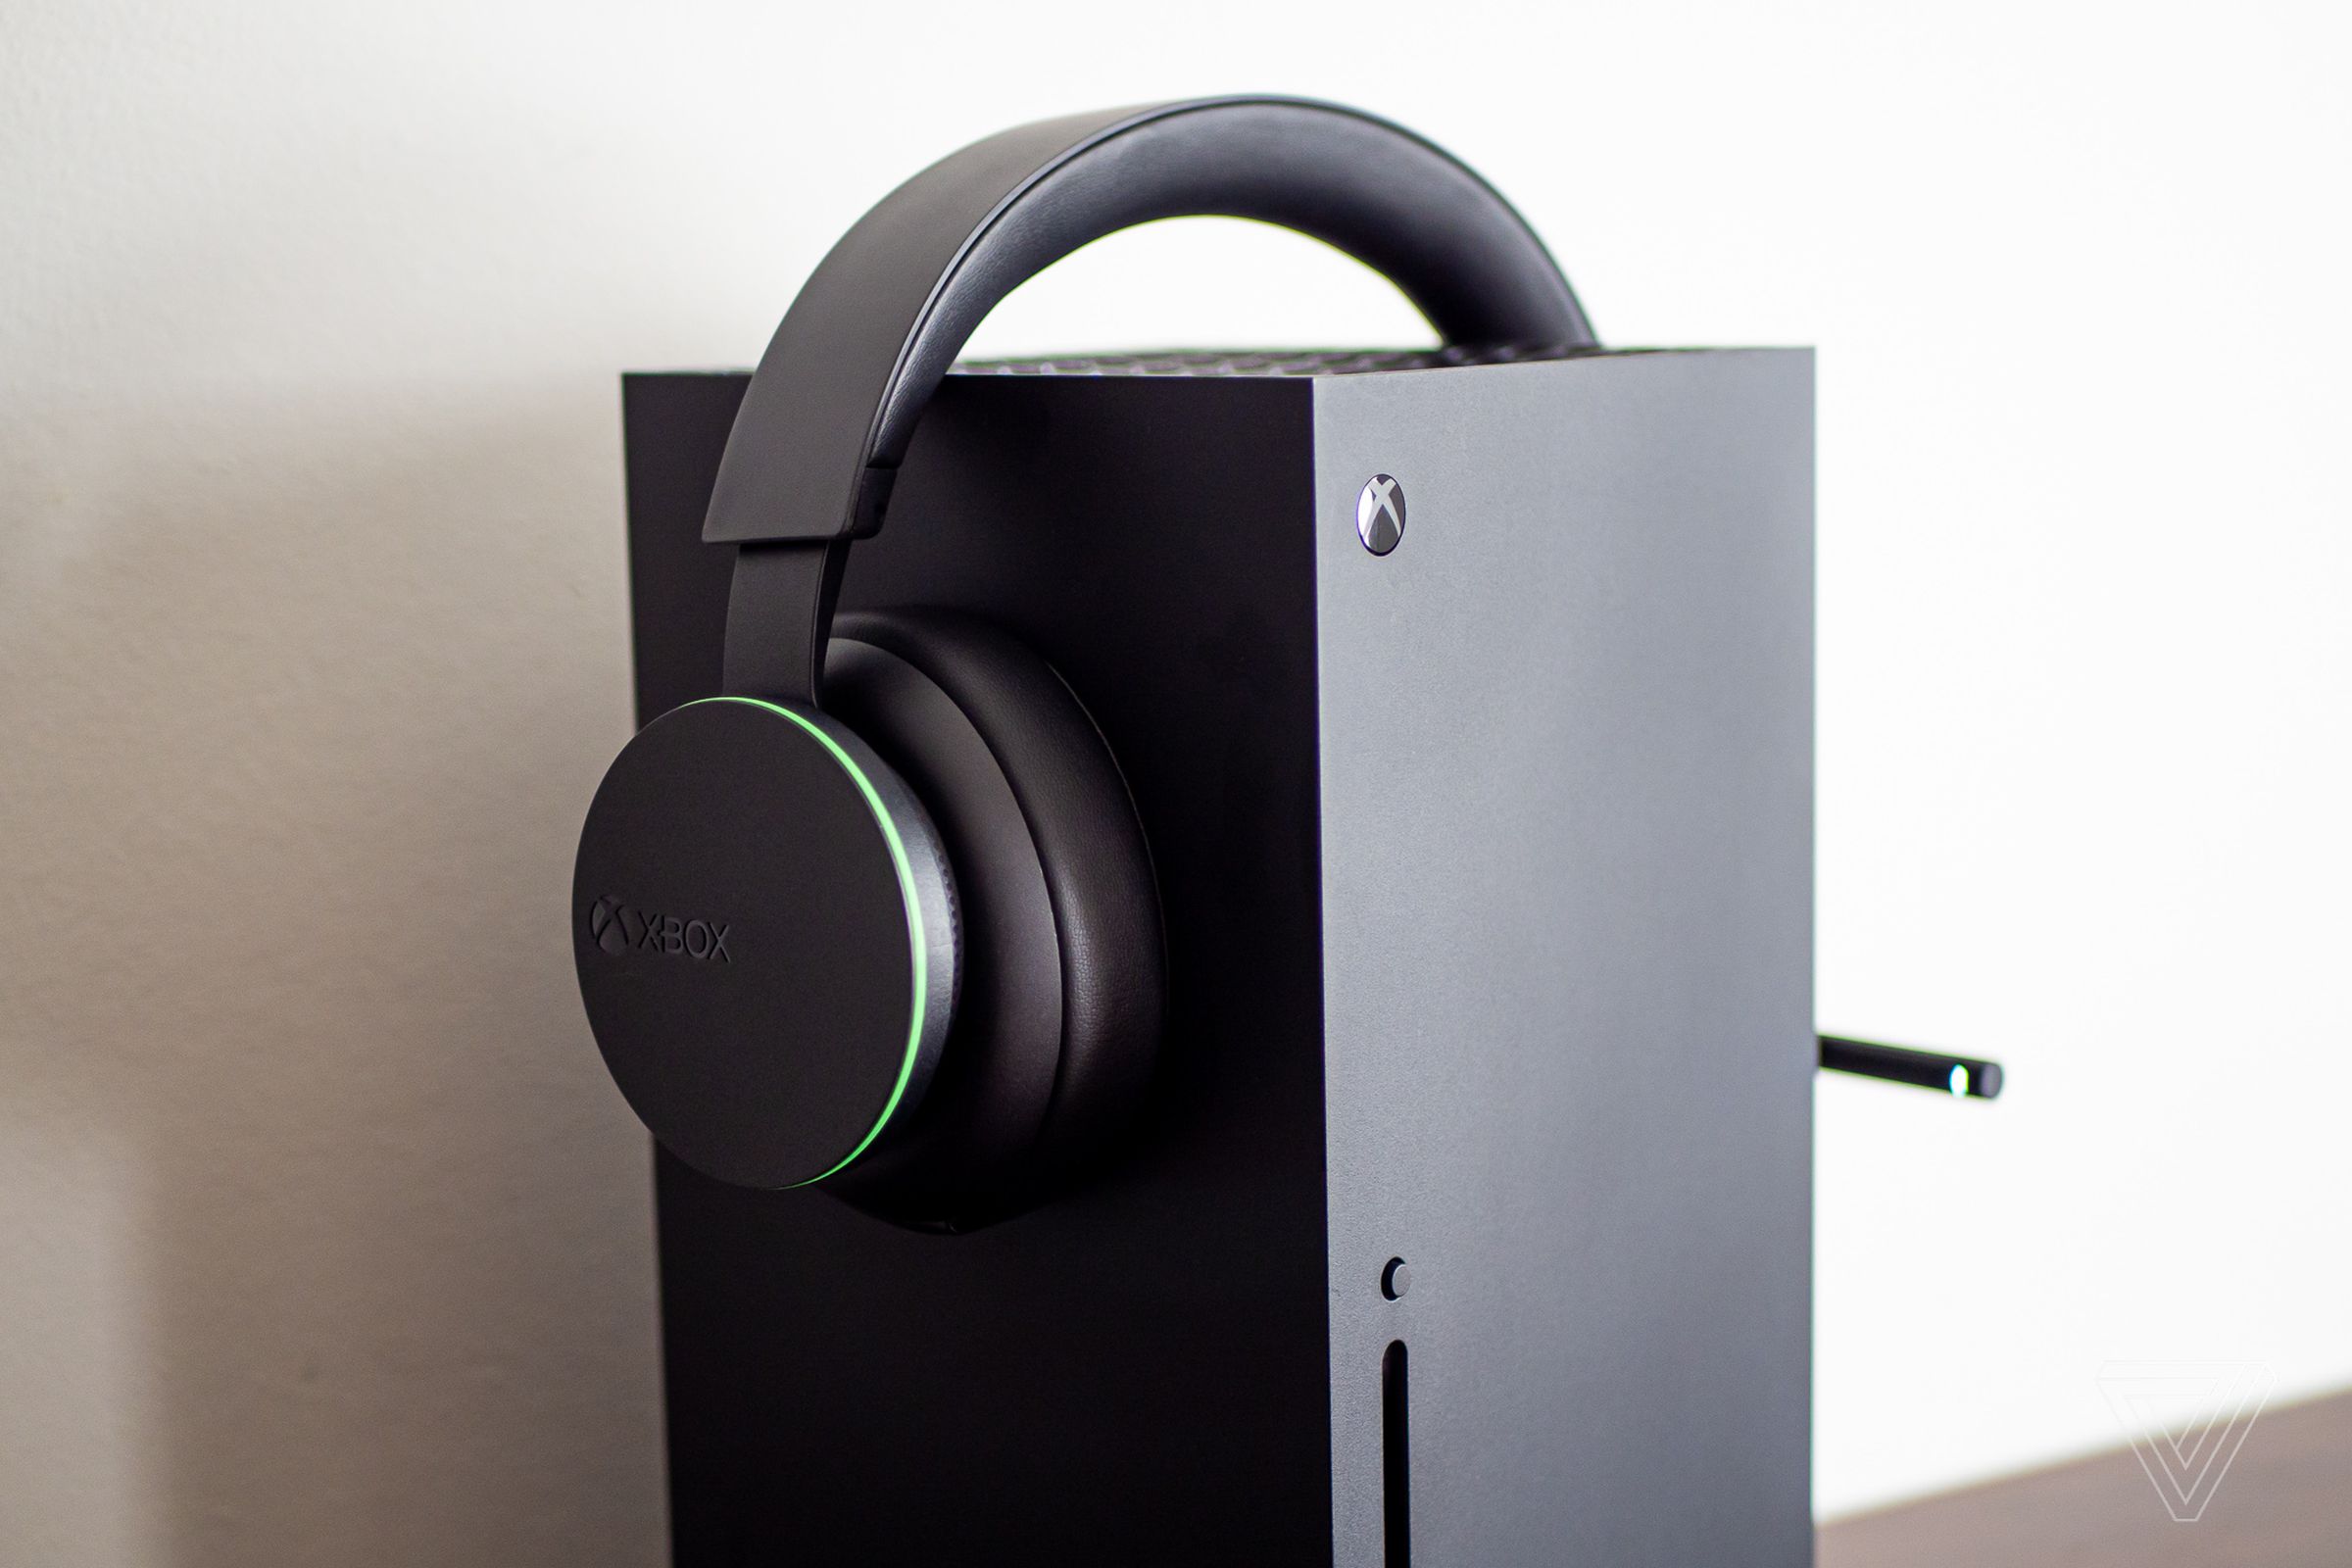 An Xbox wireless headset on top of an Xbox Series X console